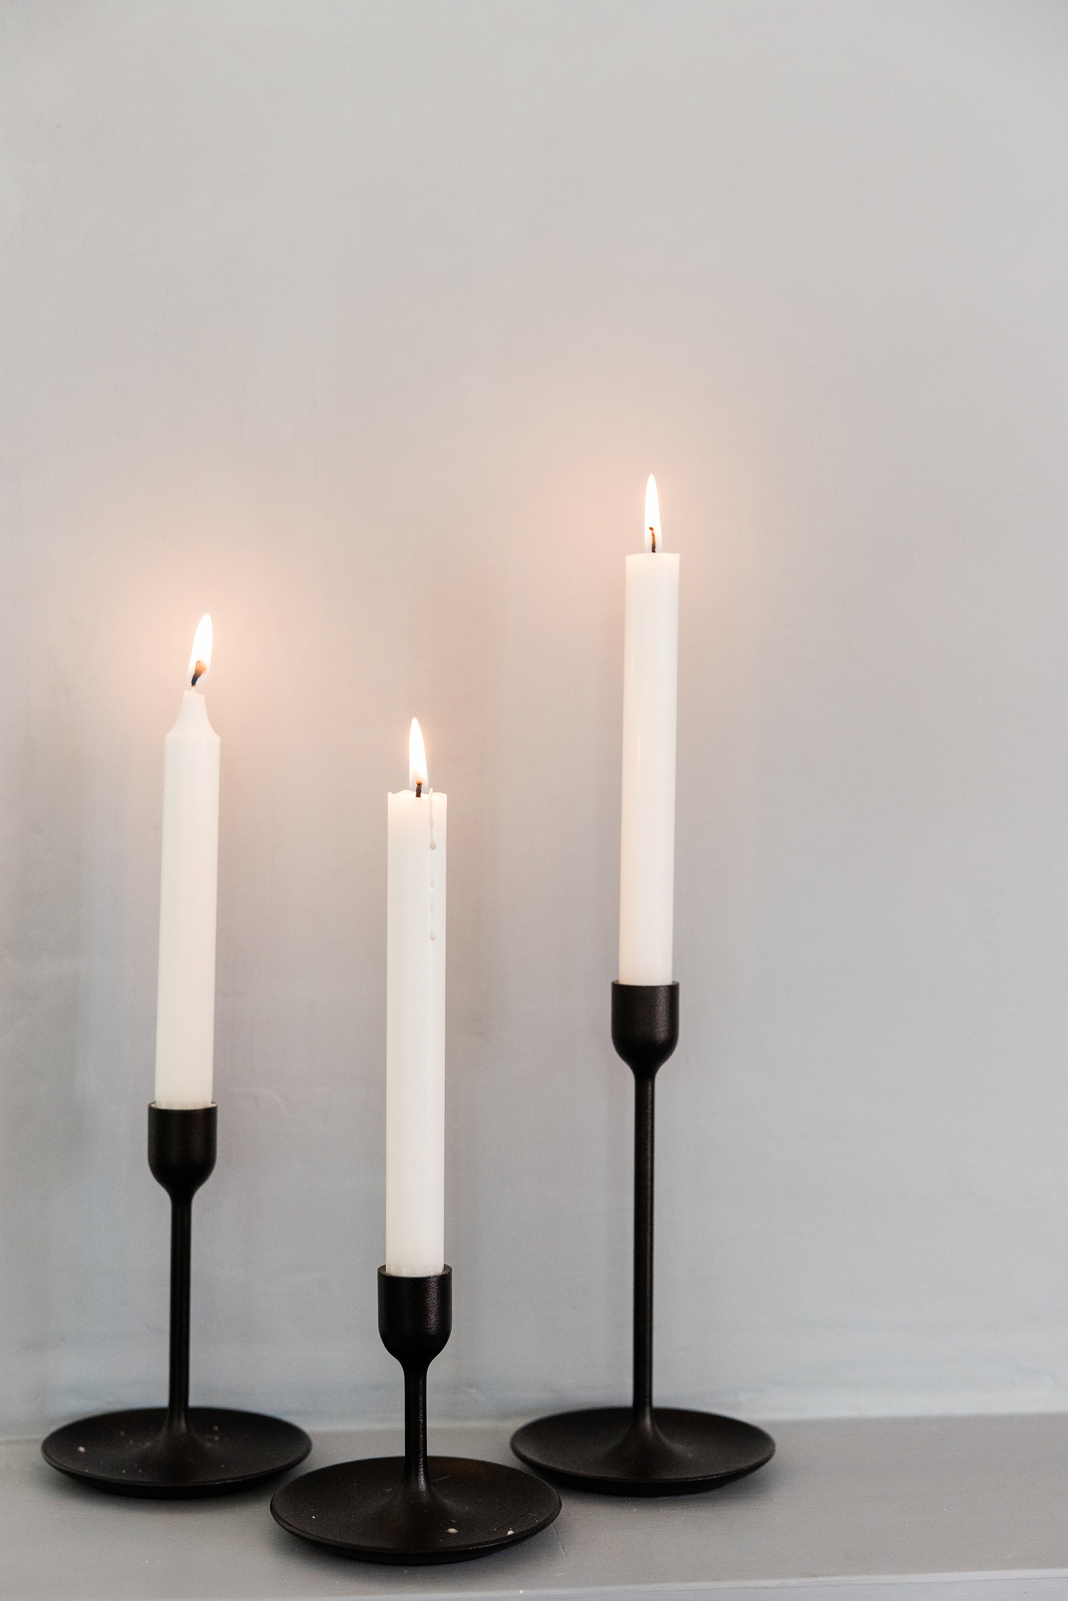 Lighted Candles on Candle Holders